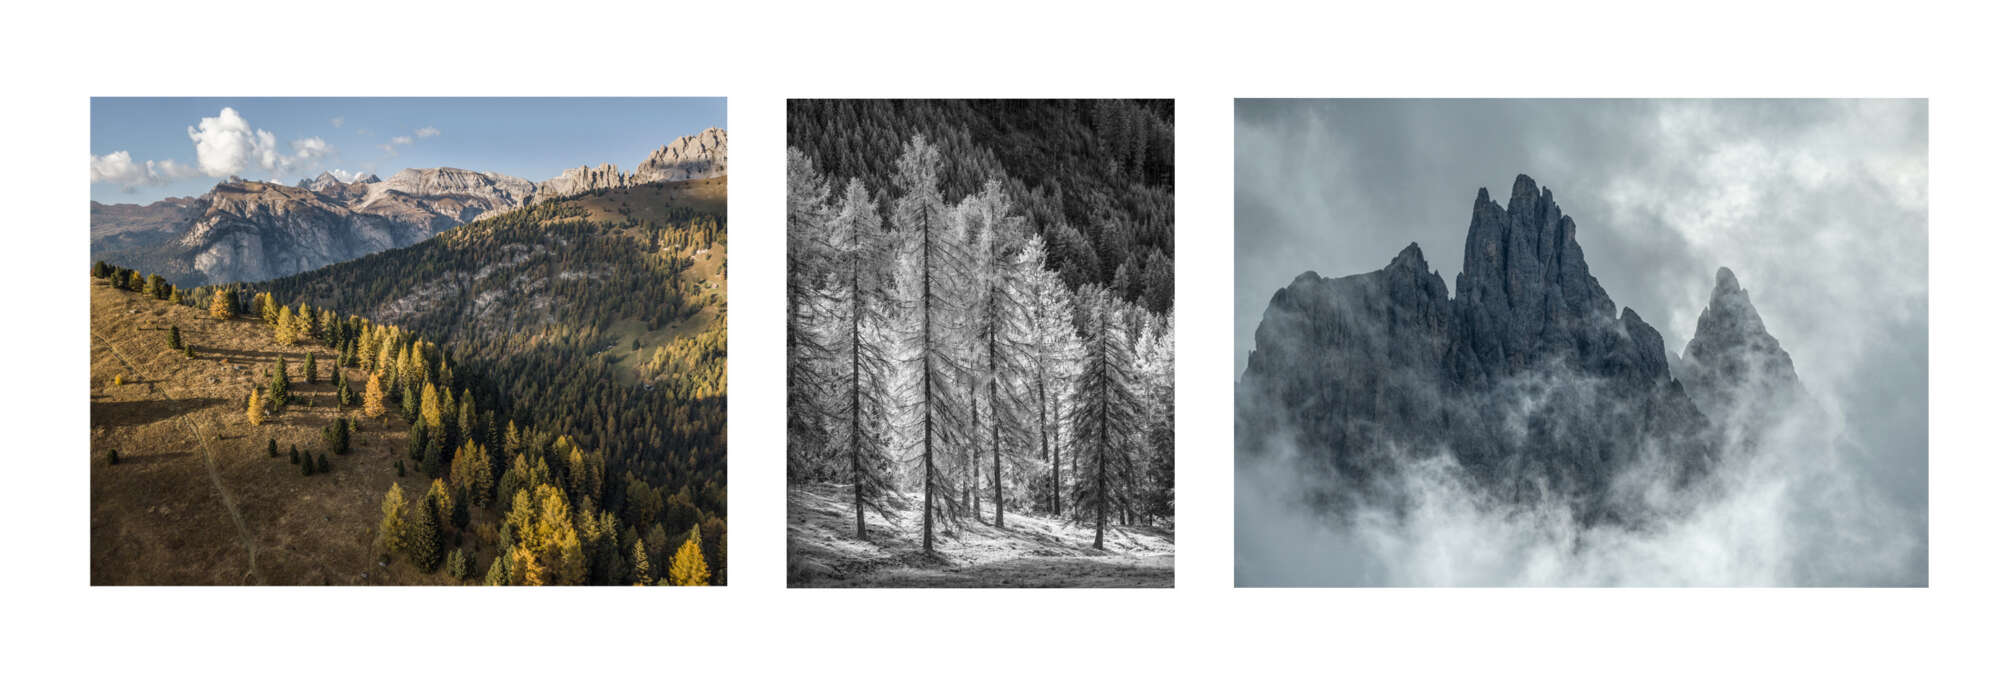 Dolomites Triptic by Paul Gallagher aspect2i